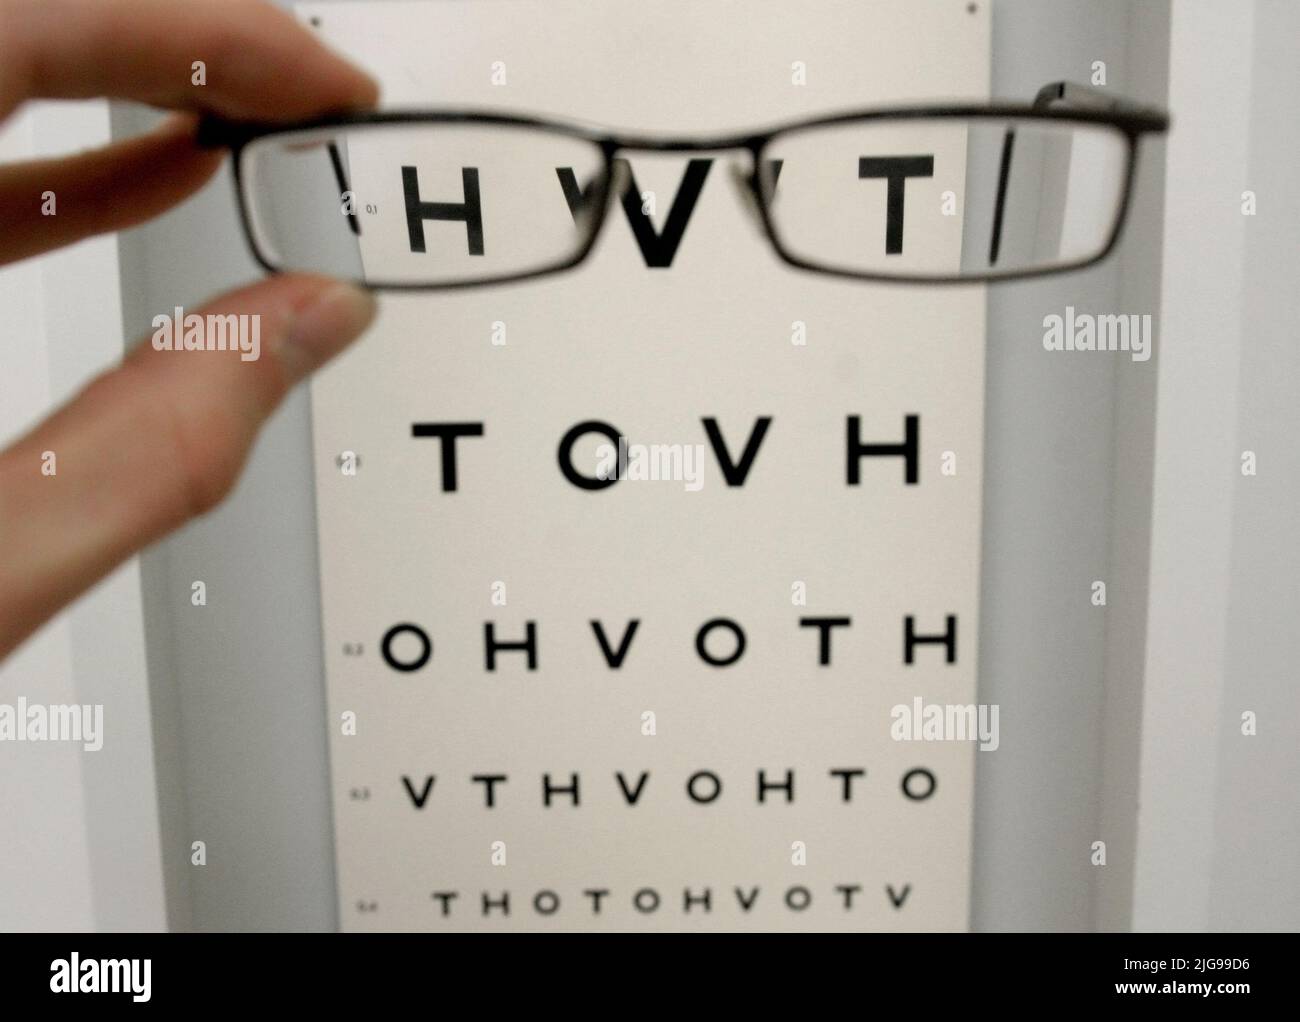 A health center. An eye chart, or optotype, is a chart used to subjectively measure visual acuity. Stock Photo